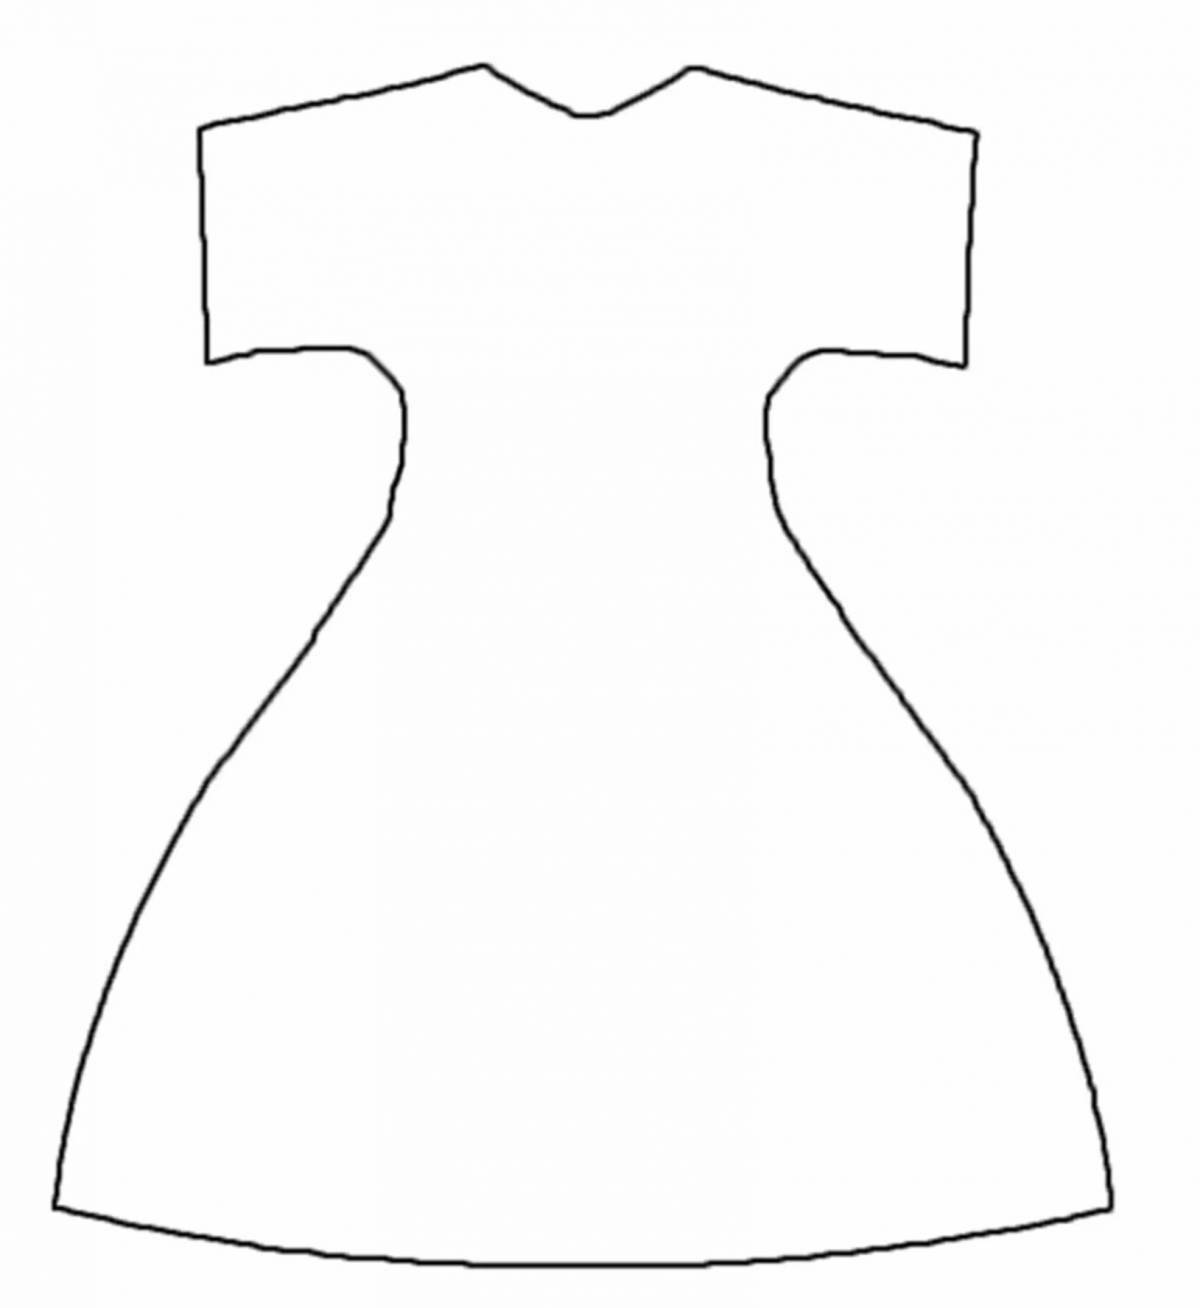 Coloring bright dress with a pattern